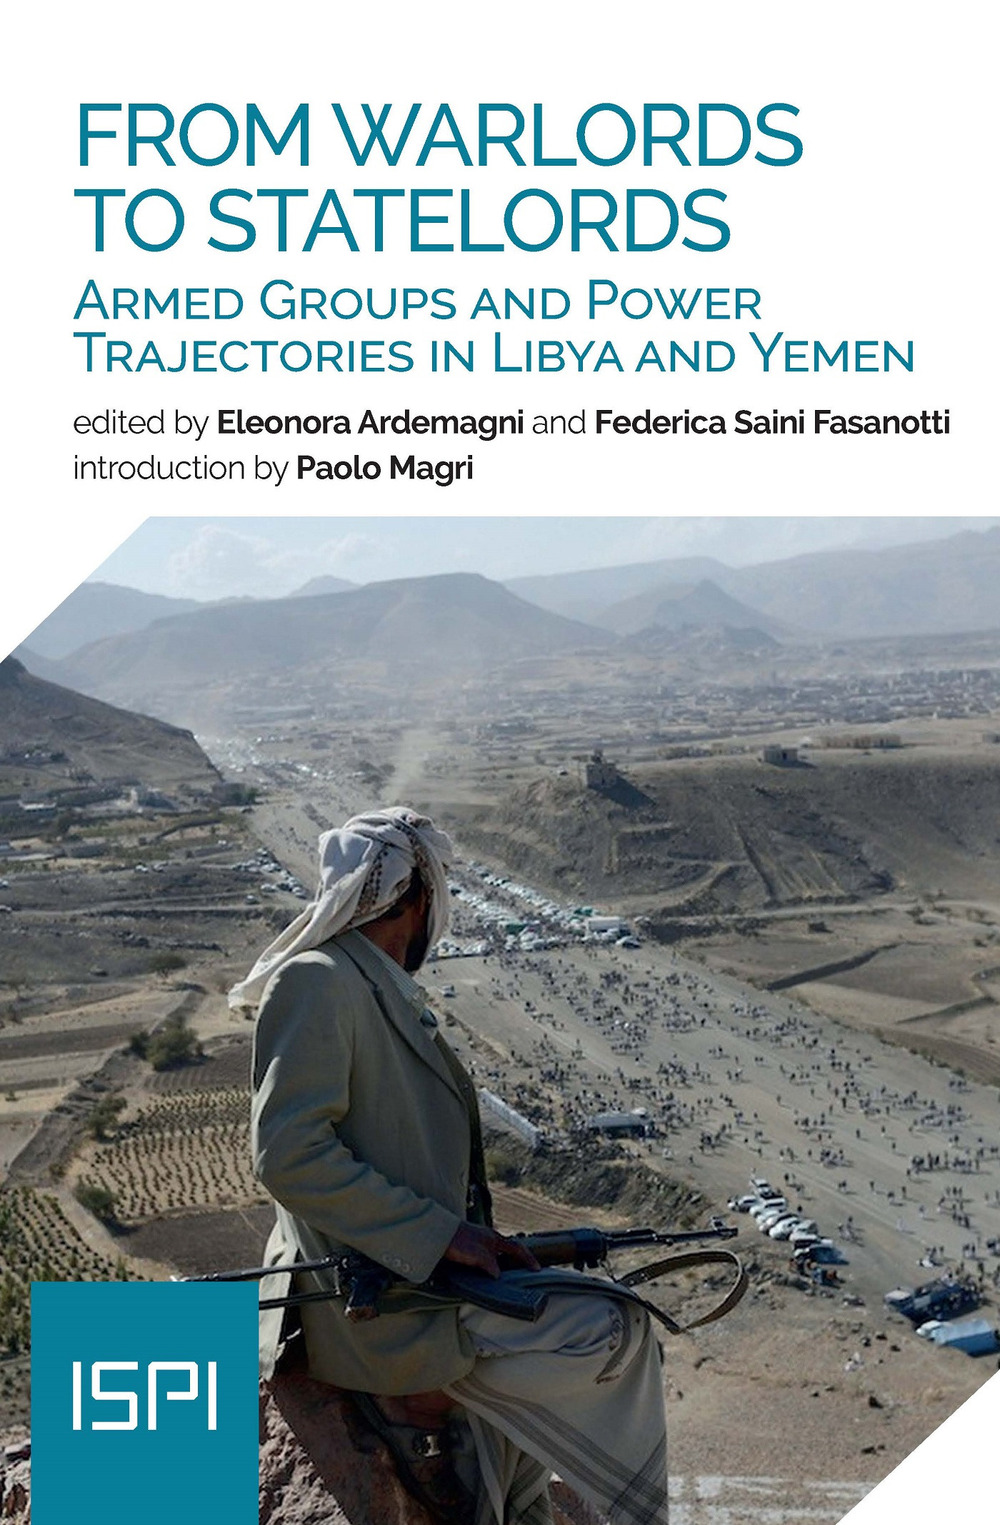 From warlords to statelords. Armed groups and power trajectories in Lybia and Yemen